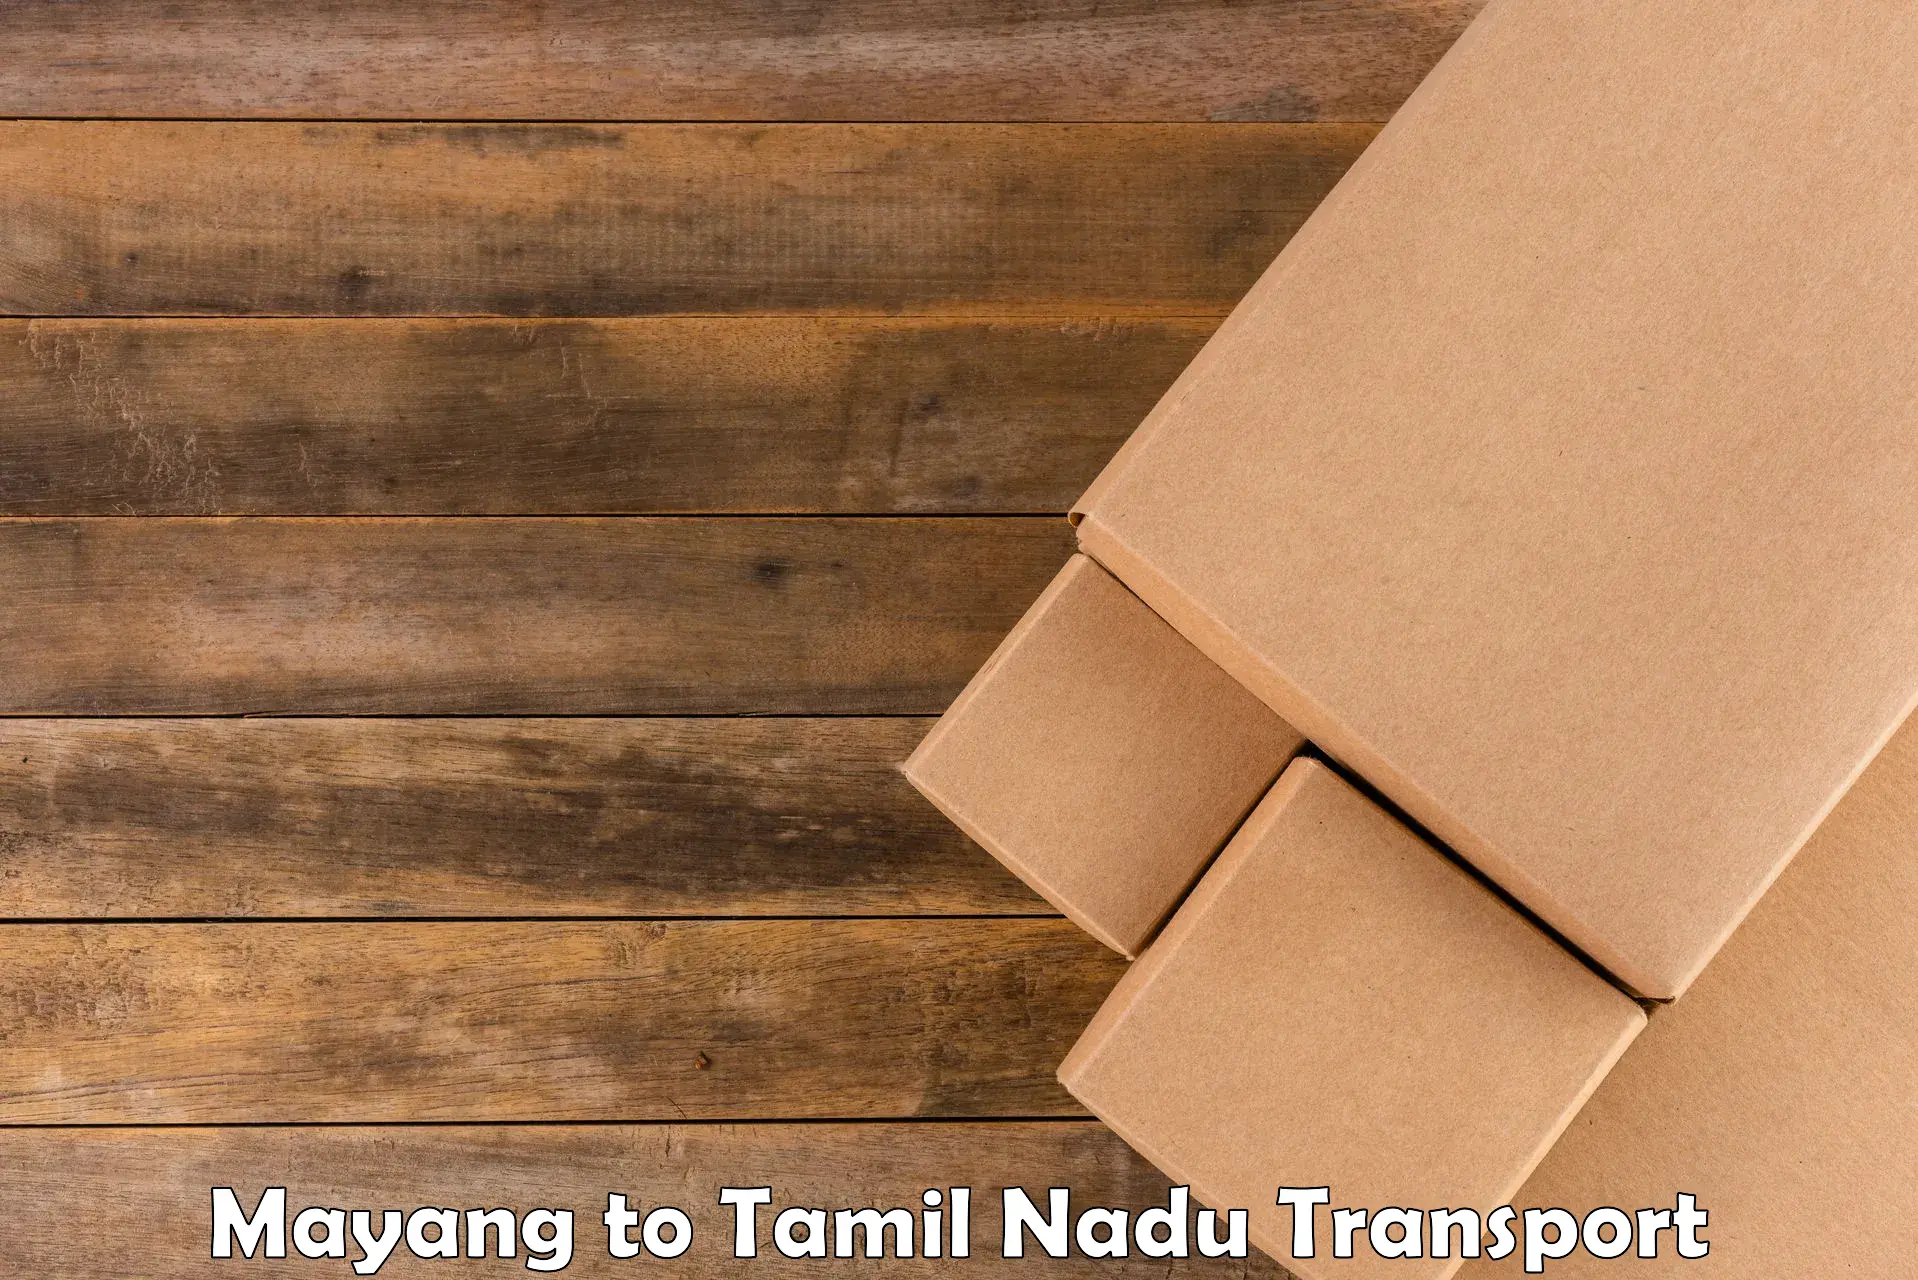 Road transport online services Mayang to Thanjavur